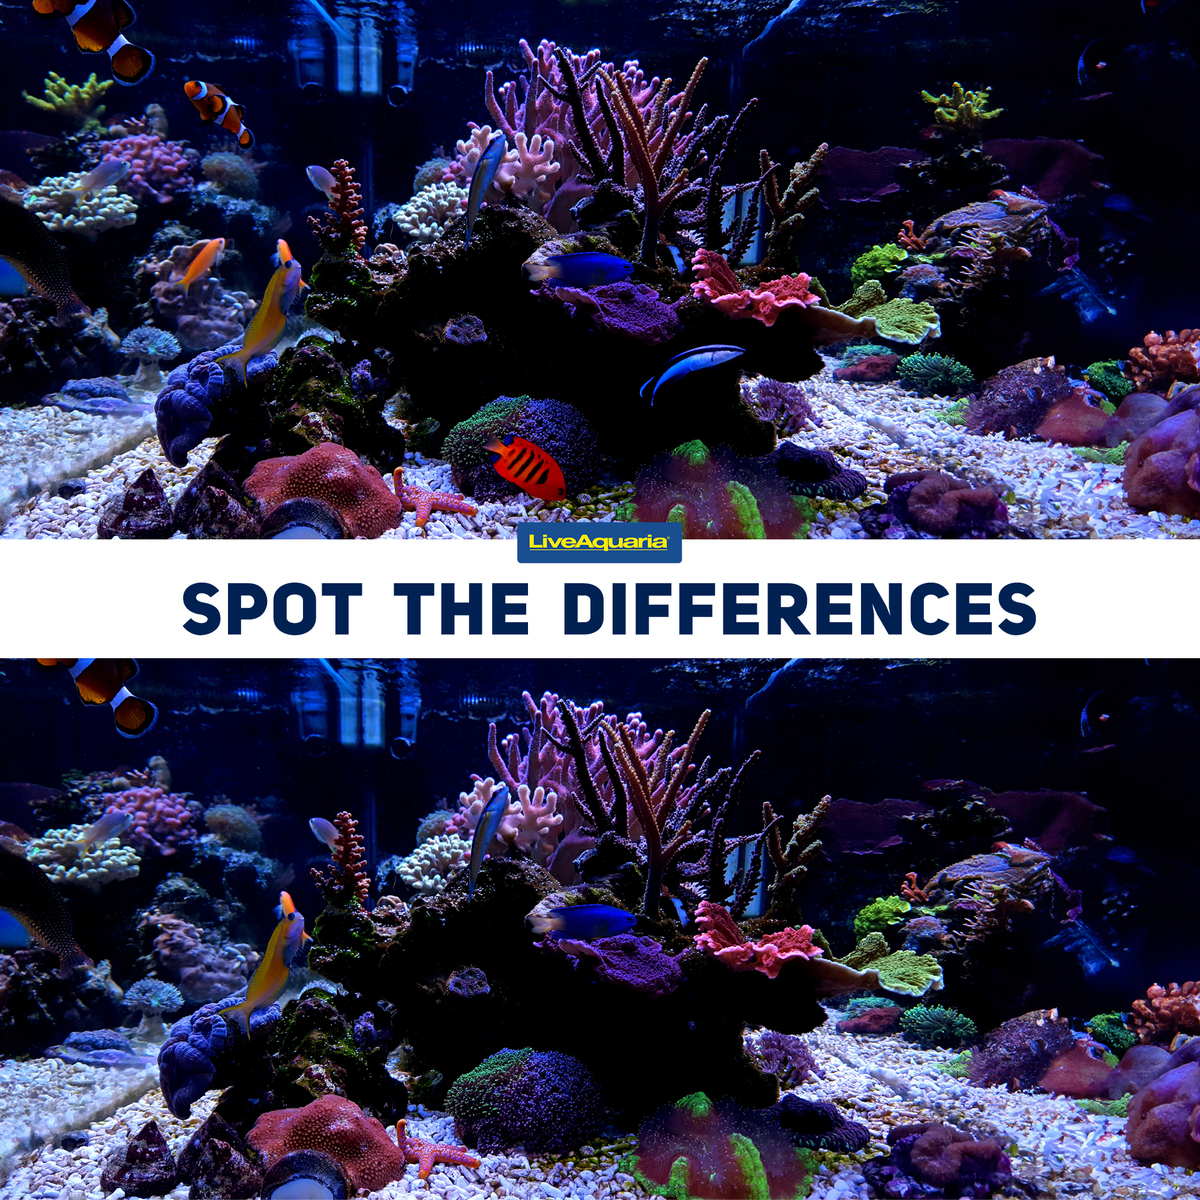 How good is your eye for detail? Think you can spot all the differences in the 2 images below?
Let us know in comments below ->

#SpotTheDifferences #AquariumLife #AquariumHobby #LiveAquaria